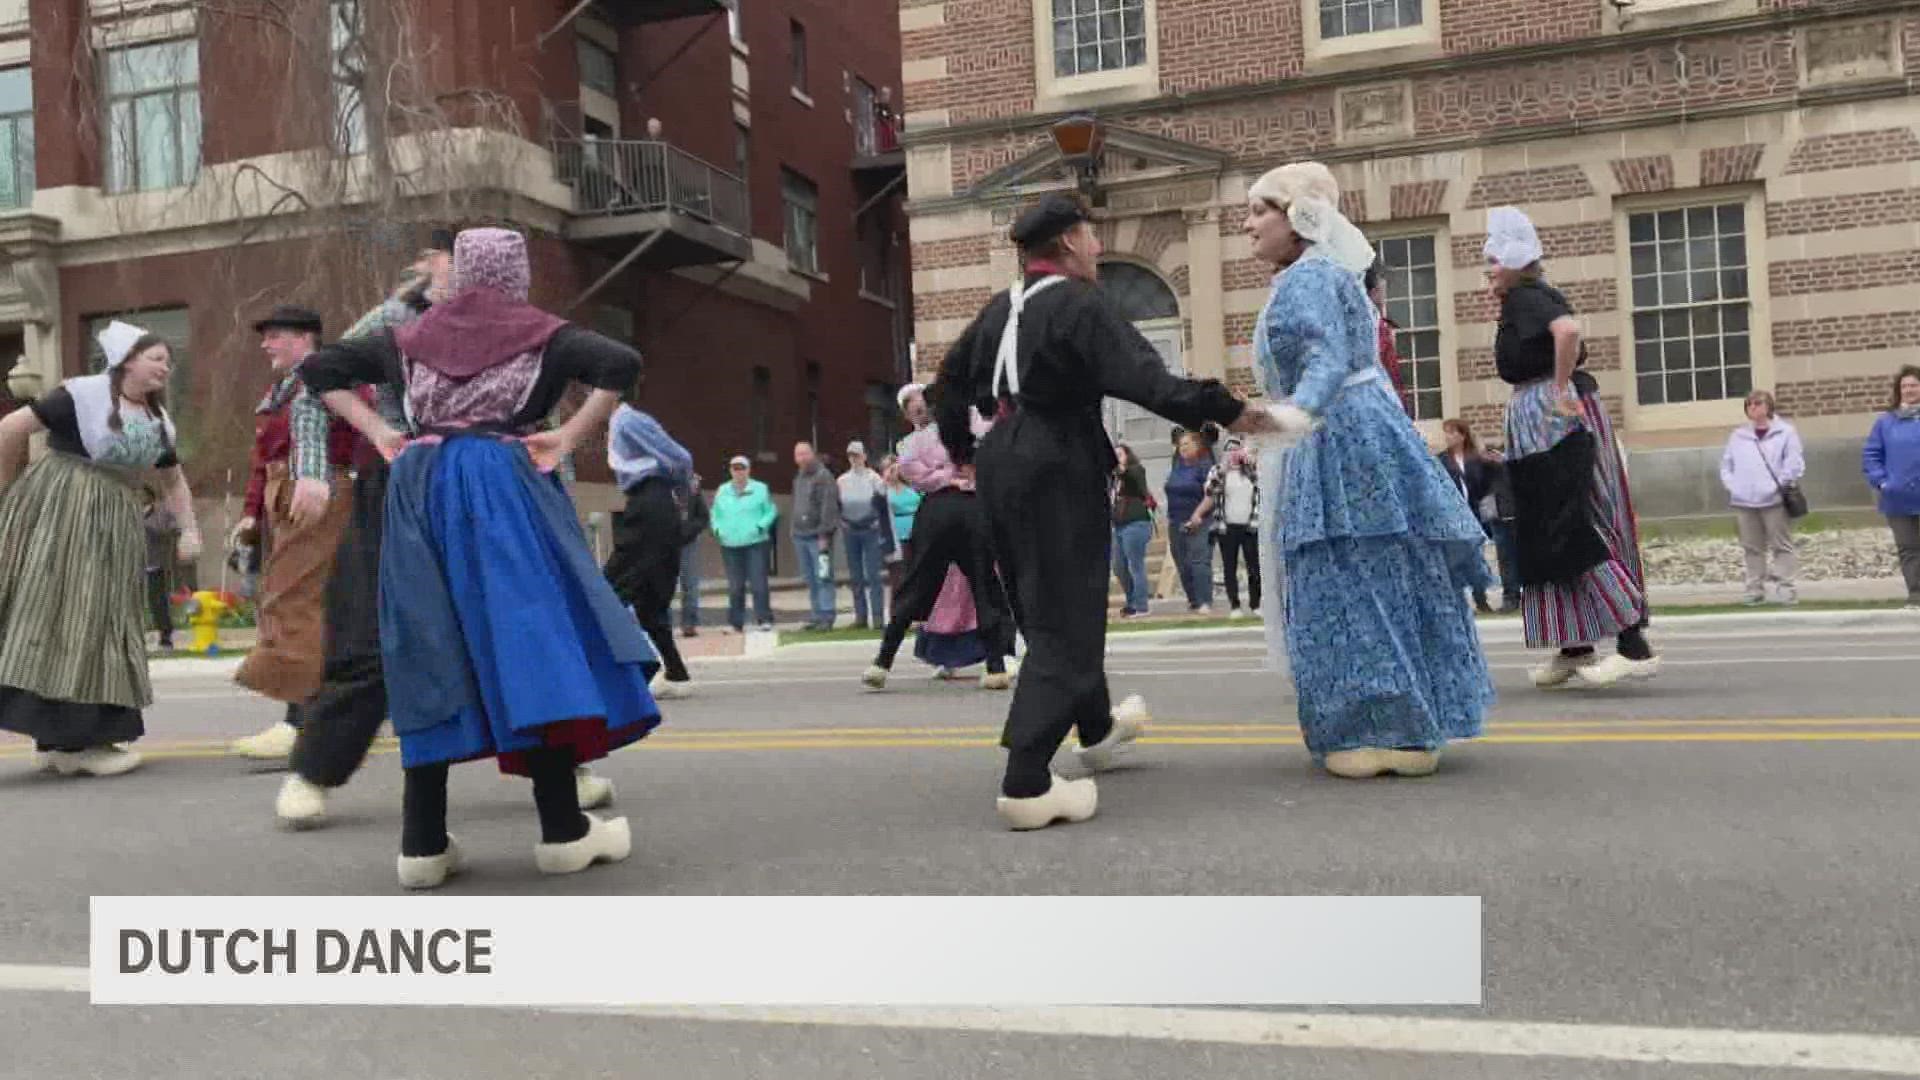 Dutch Dance is a dance group dedicated to performing during Tulip Time, with practice kicking off in January to prepare for the May event.